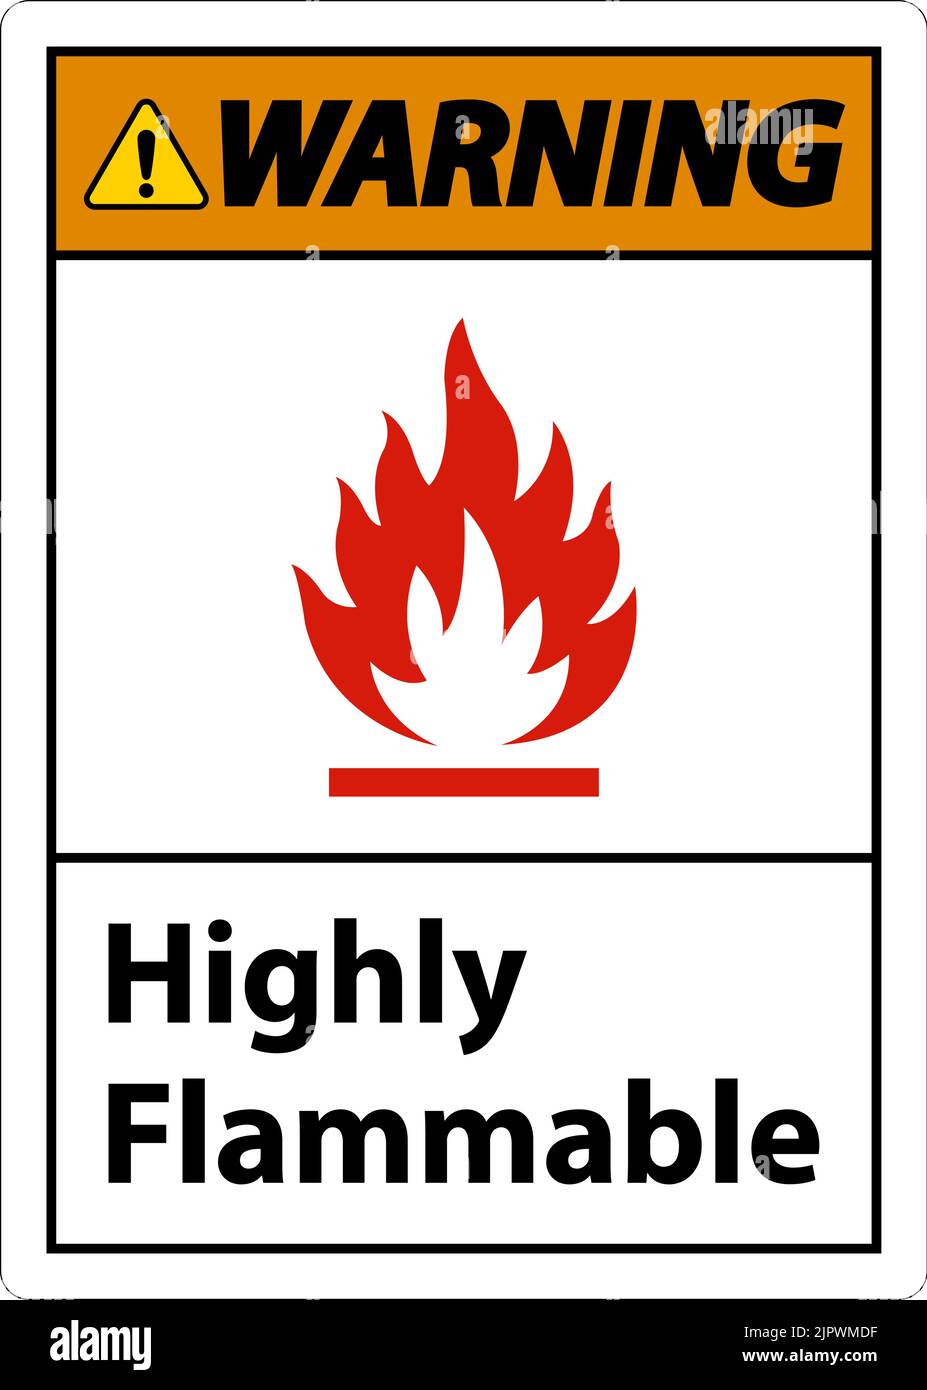 LPG Gas Highly Flammable-Sticker-Car,Van Caravan,Boat-Safety Warning Red Sign 